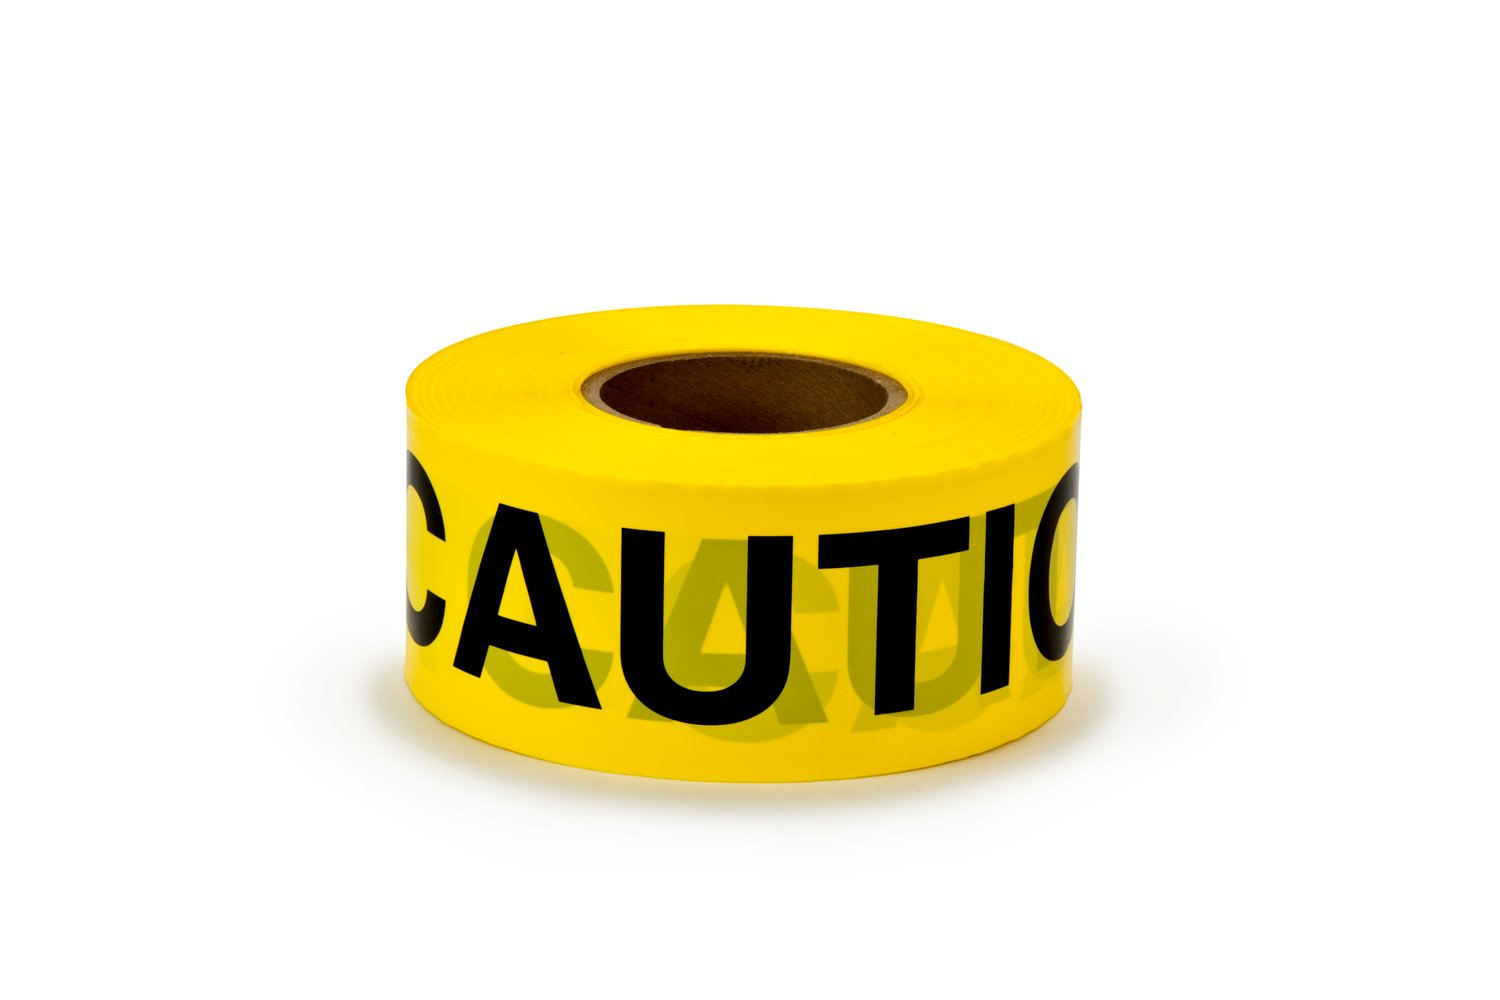 7010398056 - Scotch Barricade Tape 330, CAUTION, 3 in x 1000 ft, Yellow, 8
rolls/Case